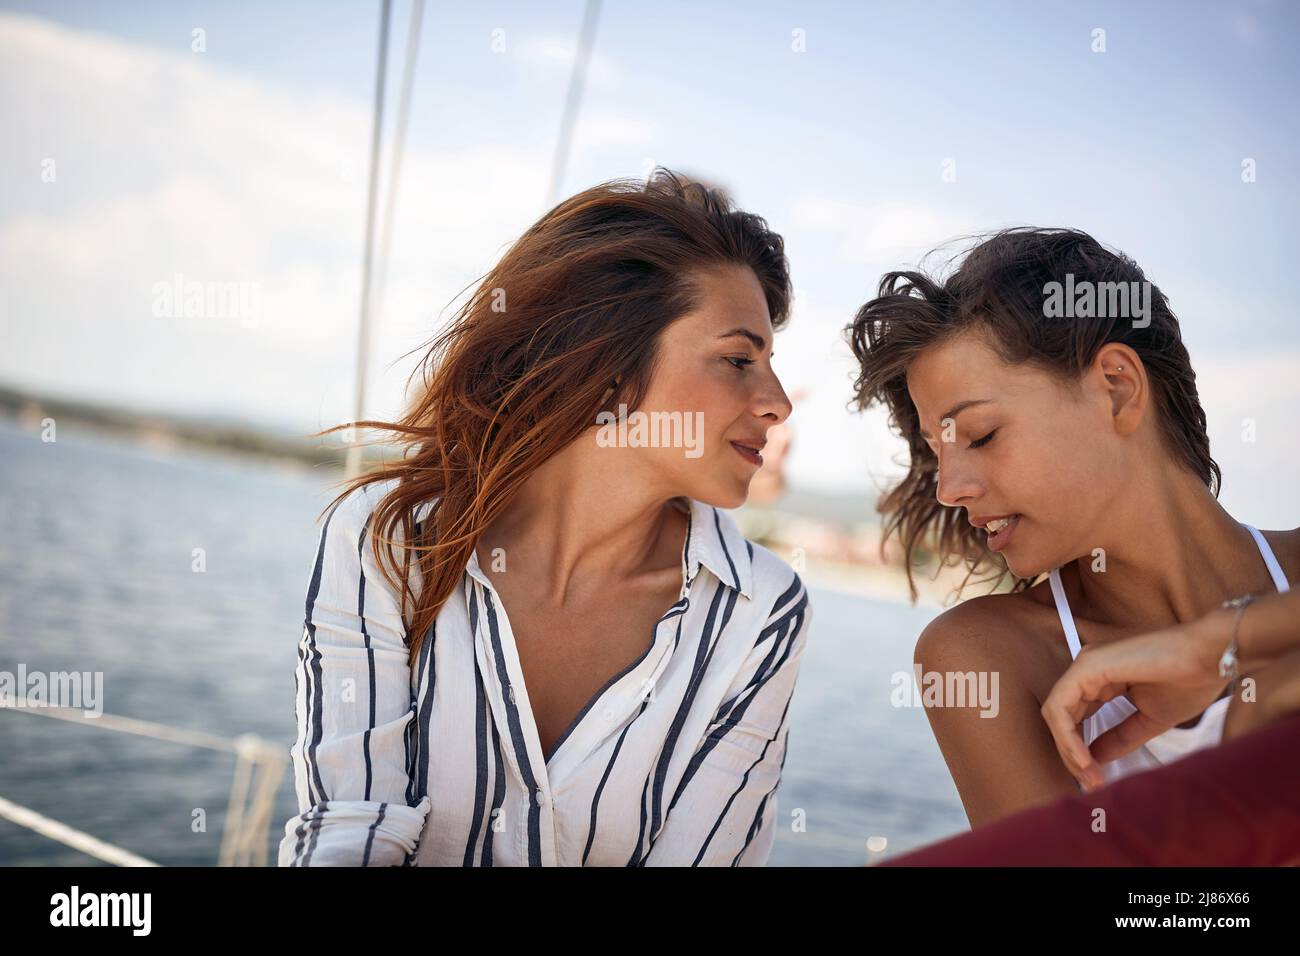 Two young rich girls enjoying together on a yacht Stock Photo